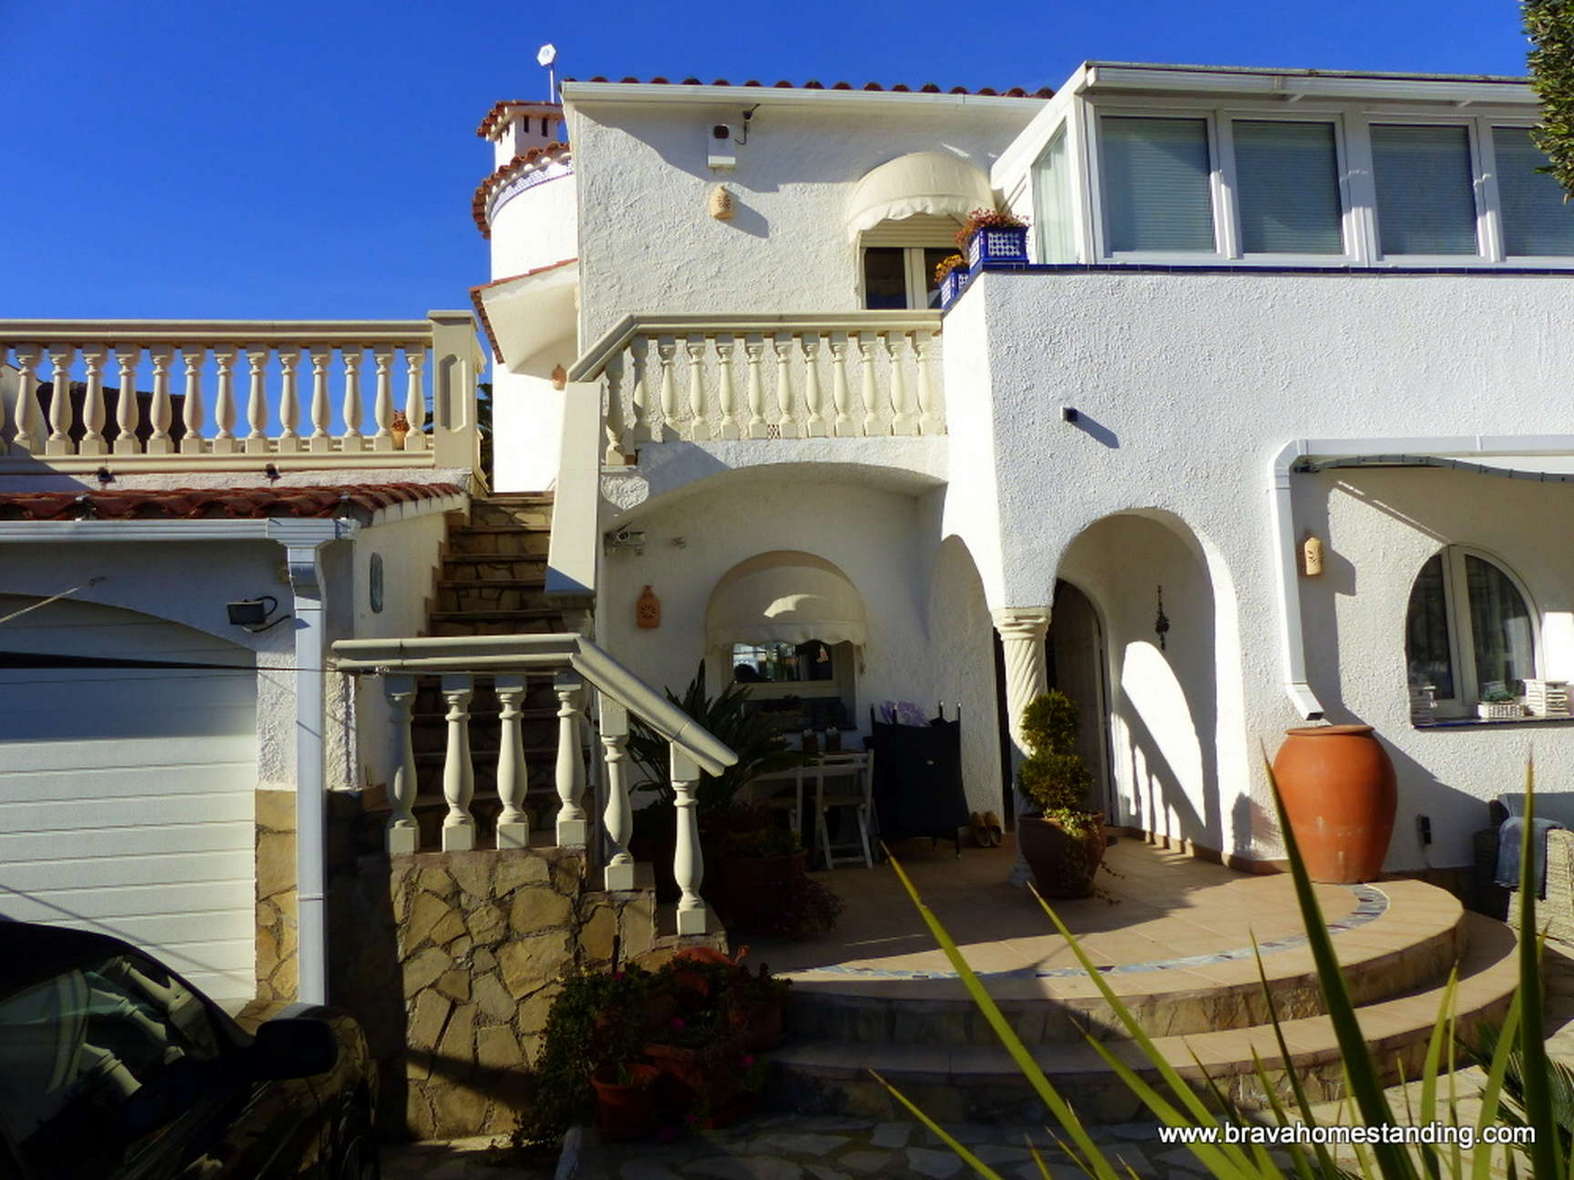 NICE VILLA IN BROAD CANAL FOR SALE IN EMPURIABRAVA